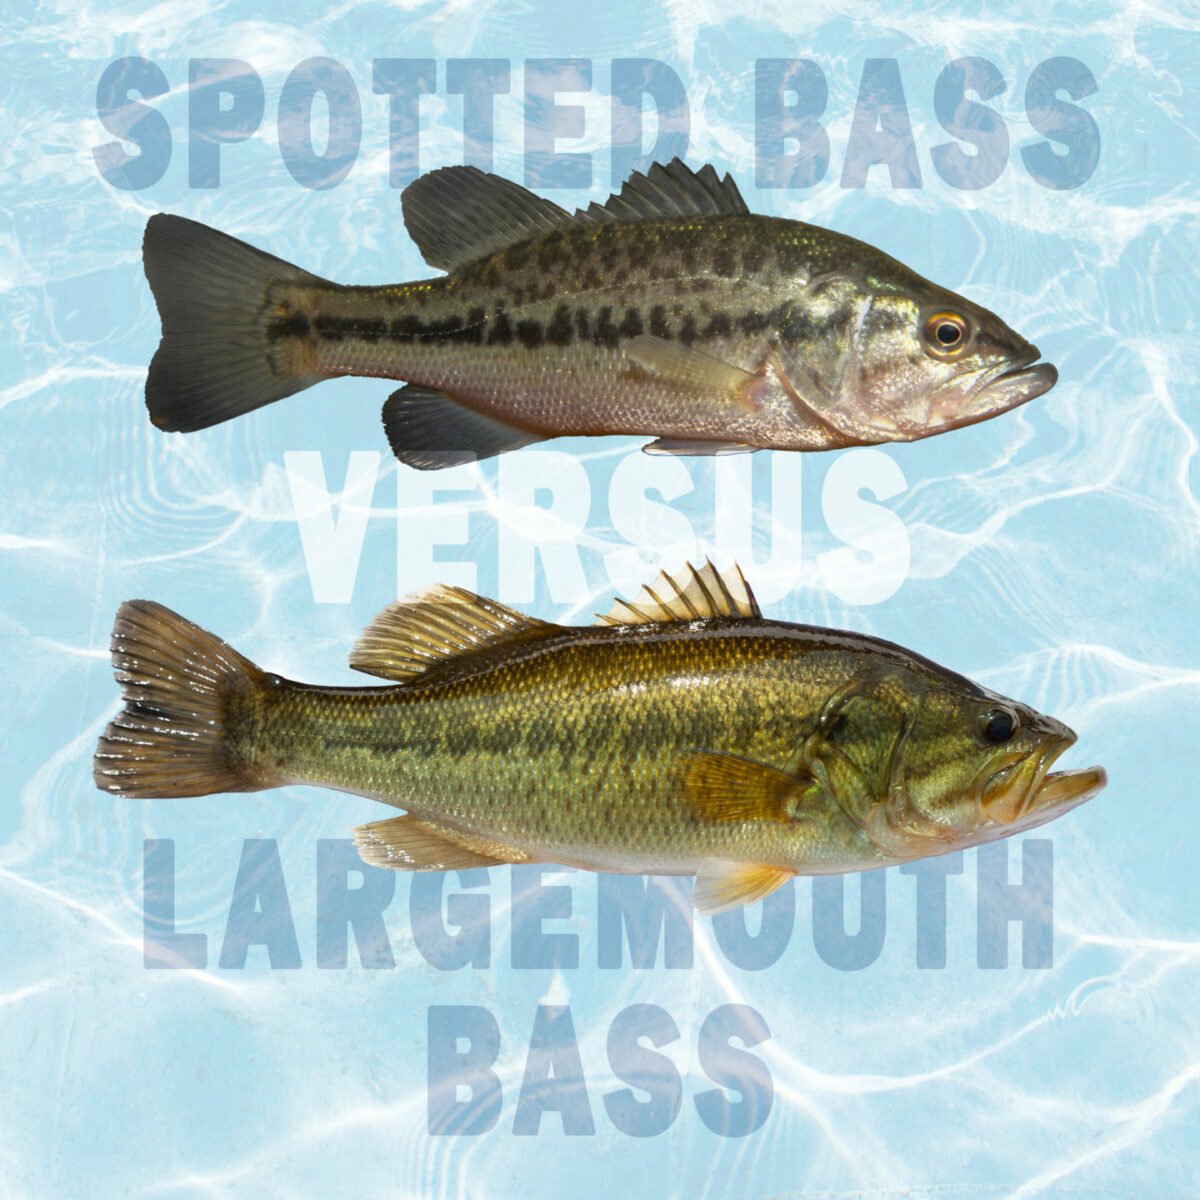 spotted vs largemouth bass all differences